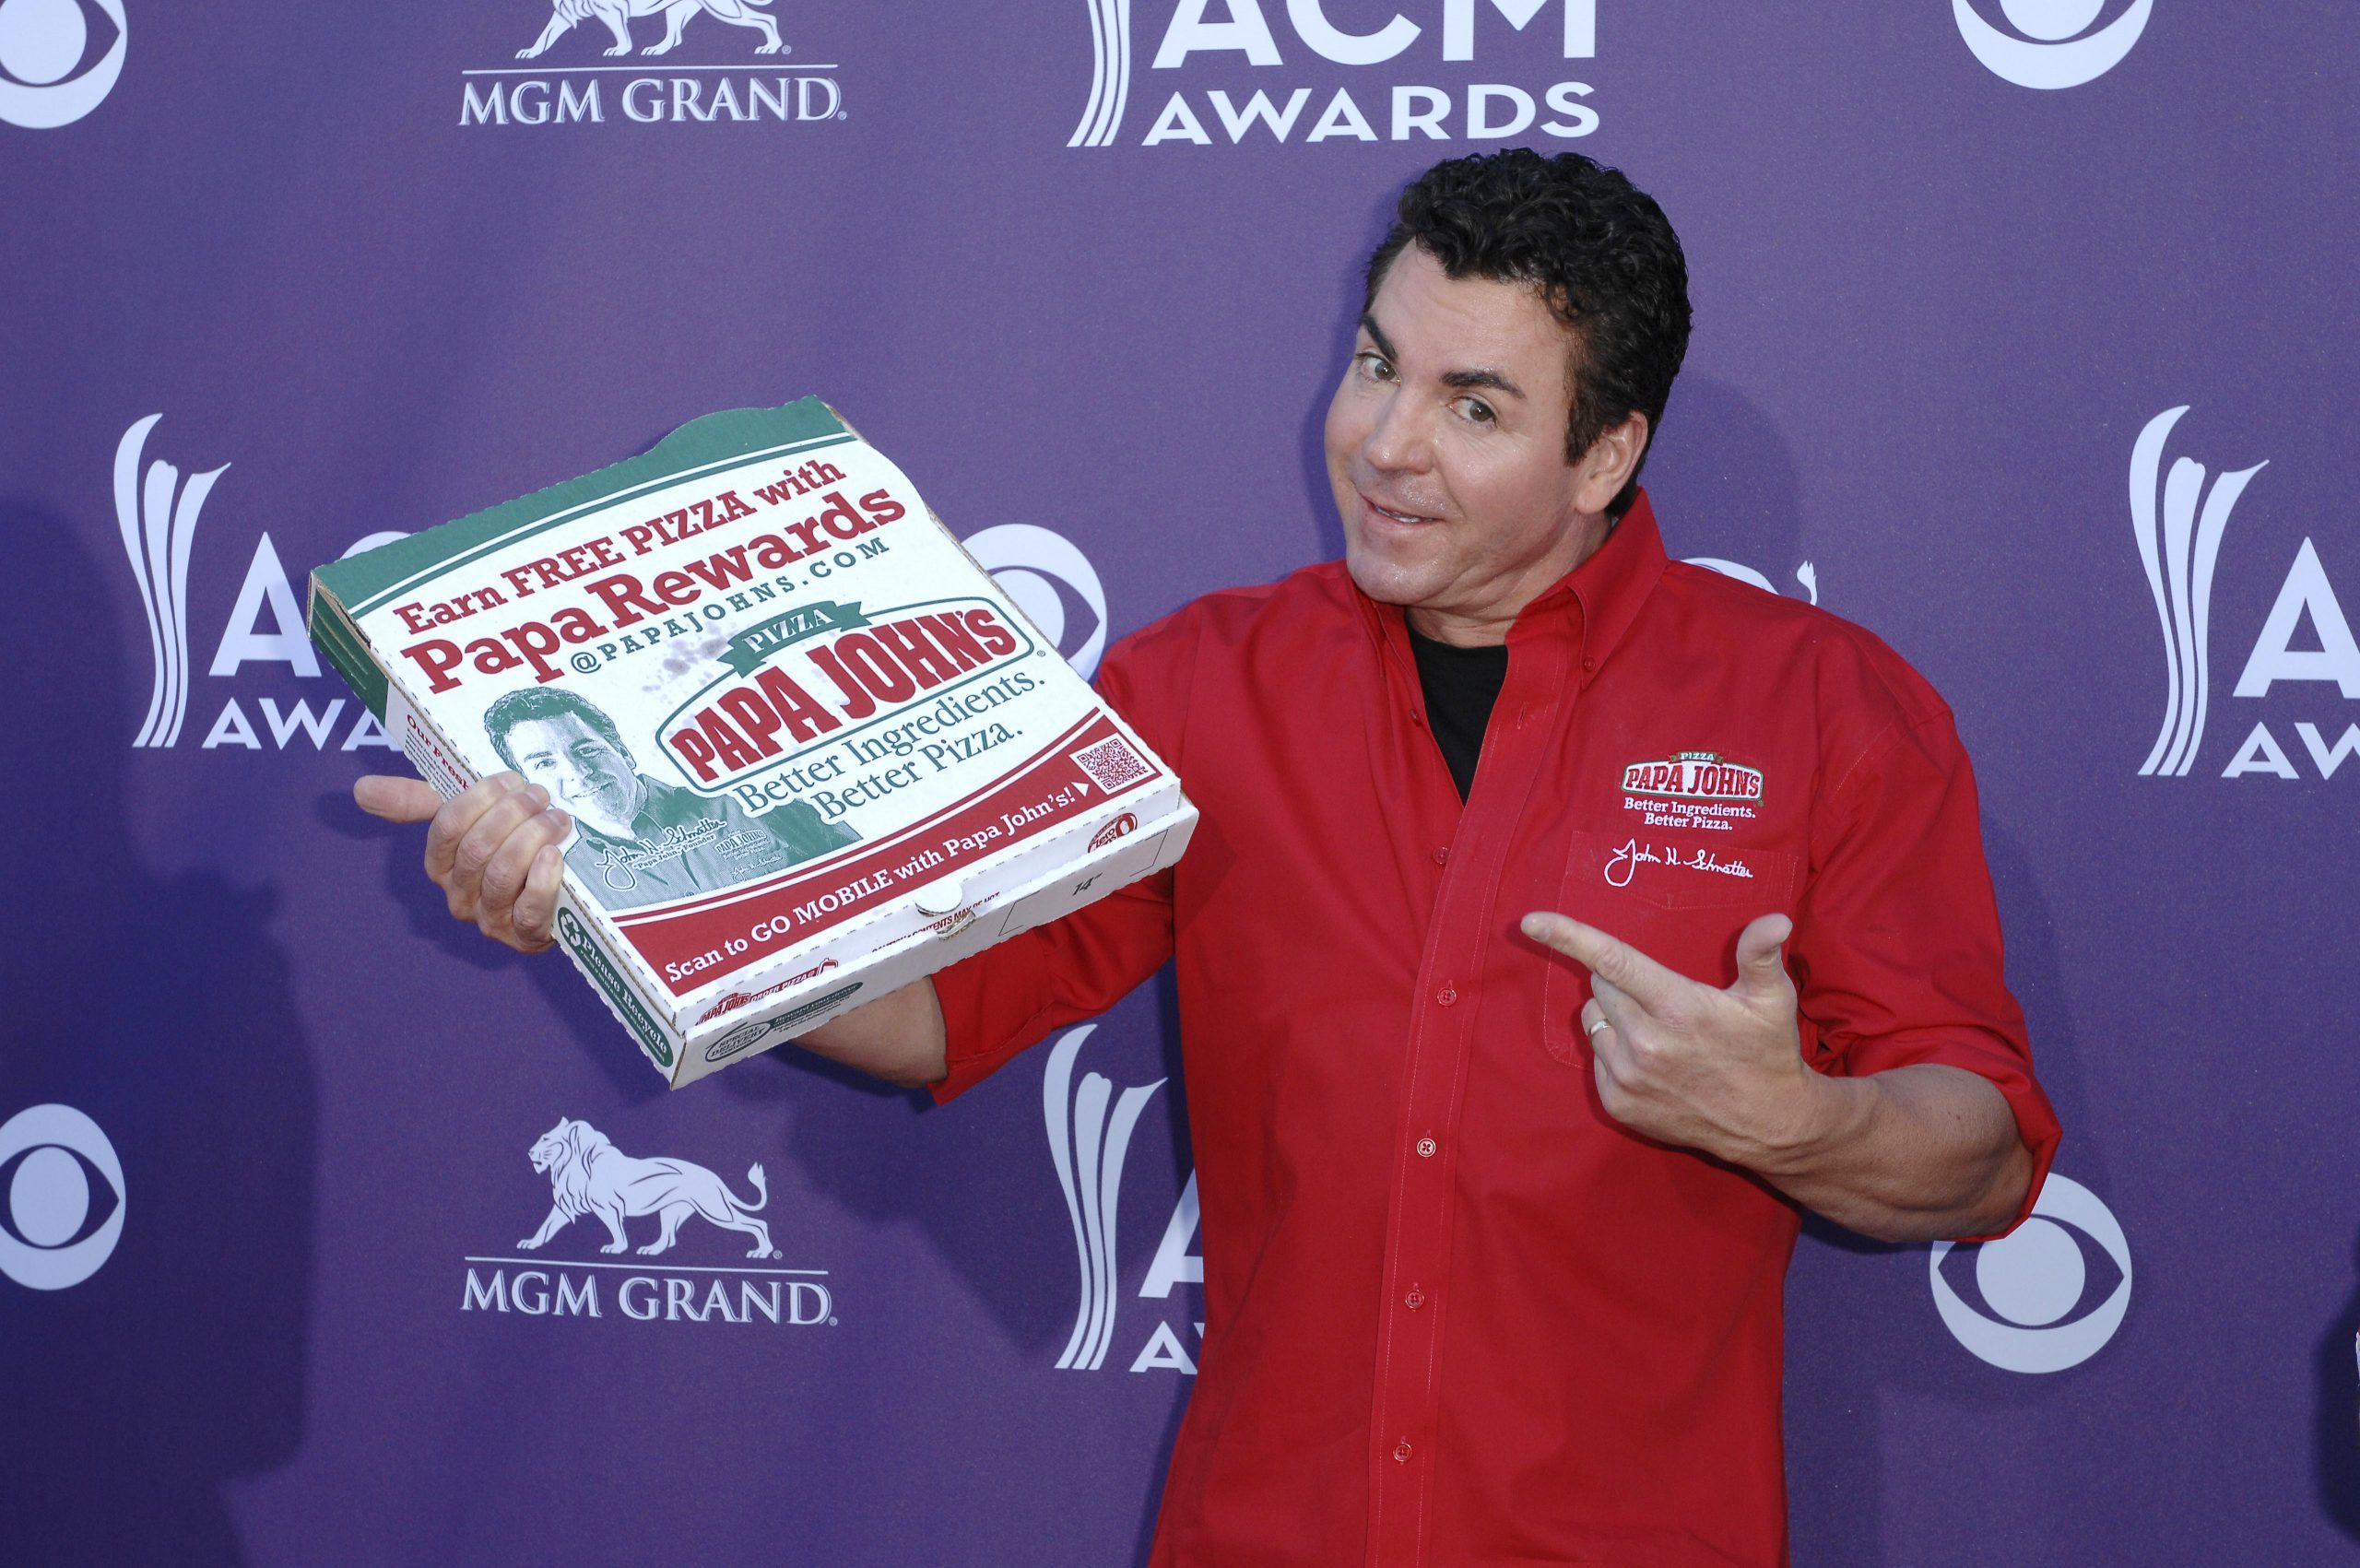 <p>What would Papa John’s pizza be without Papa John? The world is finding out, now that founder John Schnatter was kicked out of the company. In 2017, Schnatter resigned as CEO after coming under fire for blaming slow pizza sales on the fact that some NFL players were kneeling during the national anthem. He apologized but didn’t seem to learn his lesson—after using a racial slur during a media training conference call, he was evicted from the company and later stepped down as chairman. These are the <a href="https://www.rd.com/list/13-things-your-pizza-guy-wont-tell-you/">secrets your pizza delivery guy won't tell you</a>.</p>